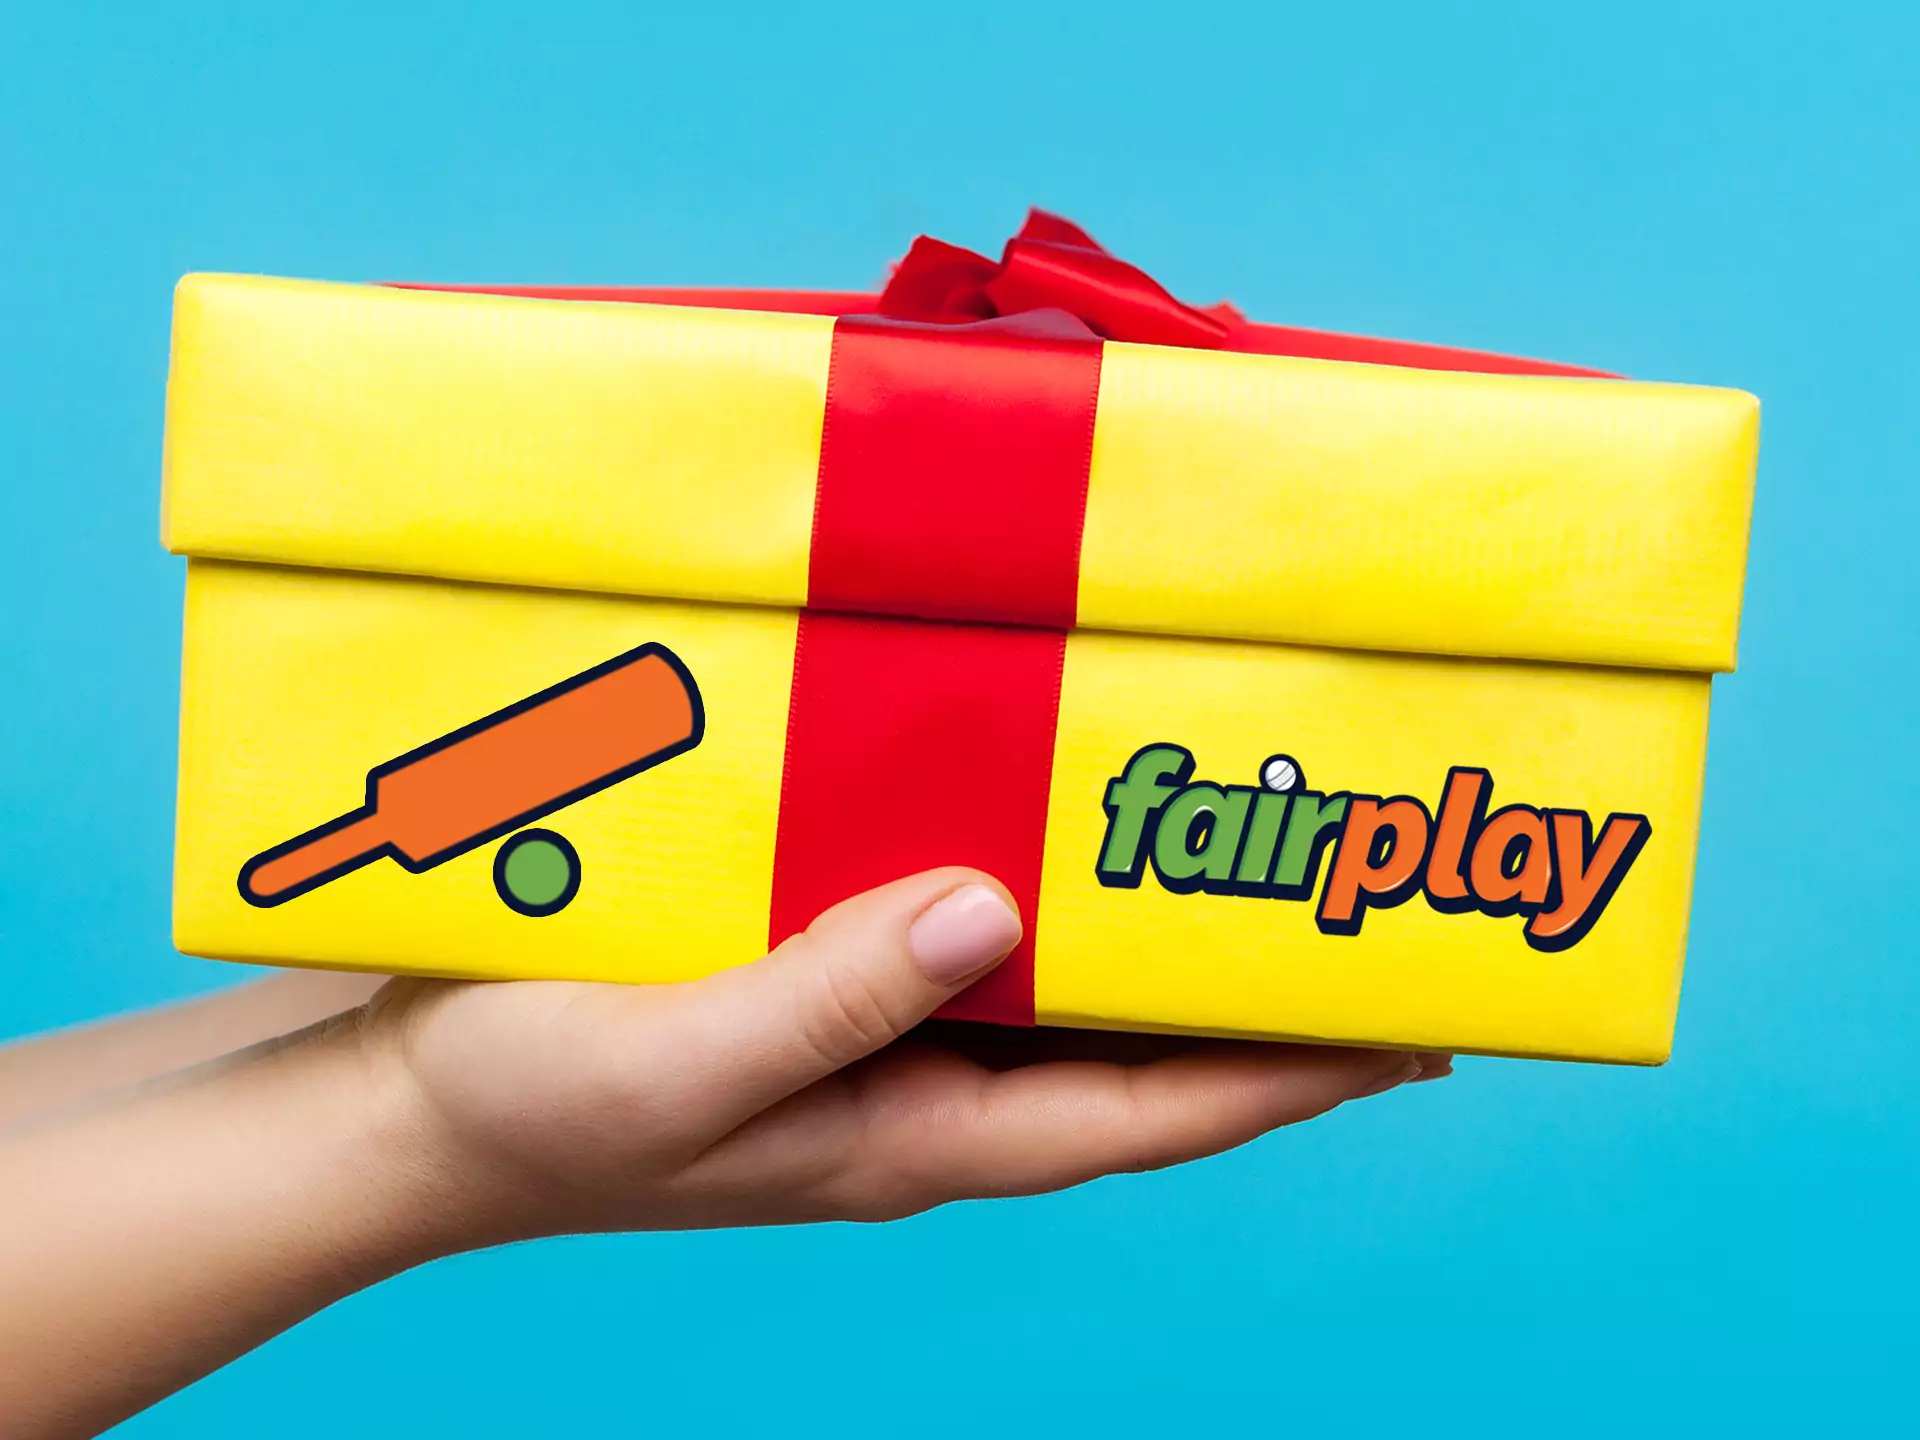 Fairplay offers lucrative bonuses for regular users.